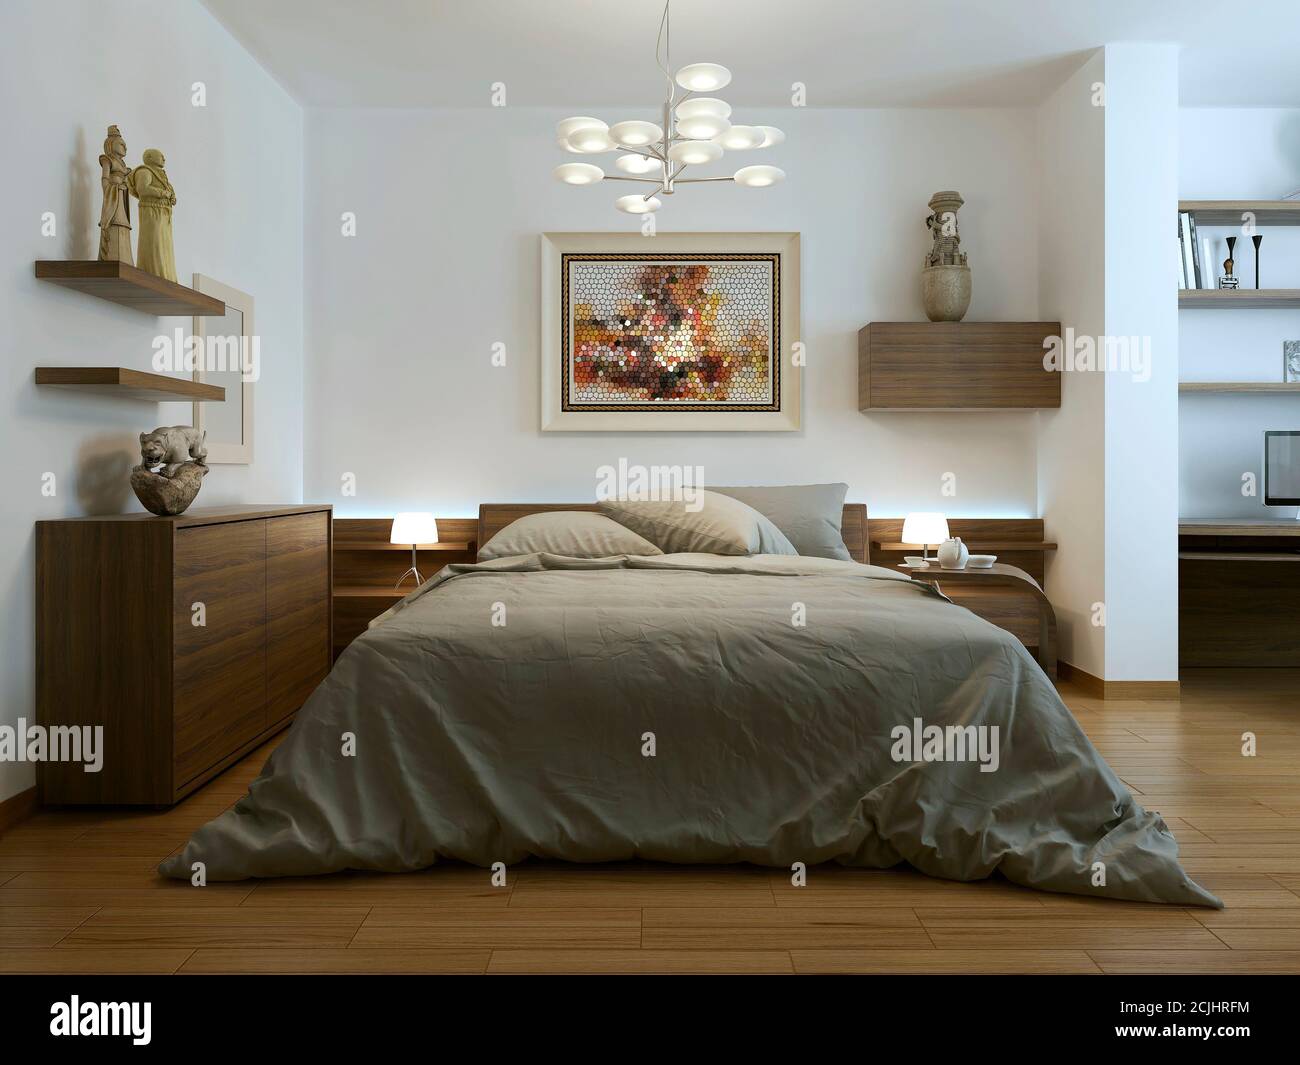 Contemporary style bedroom, 3d images Stock Photo